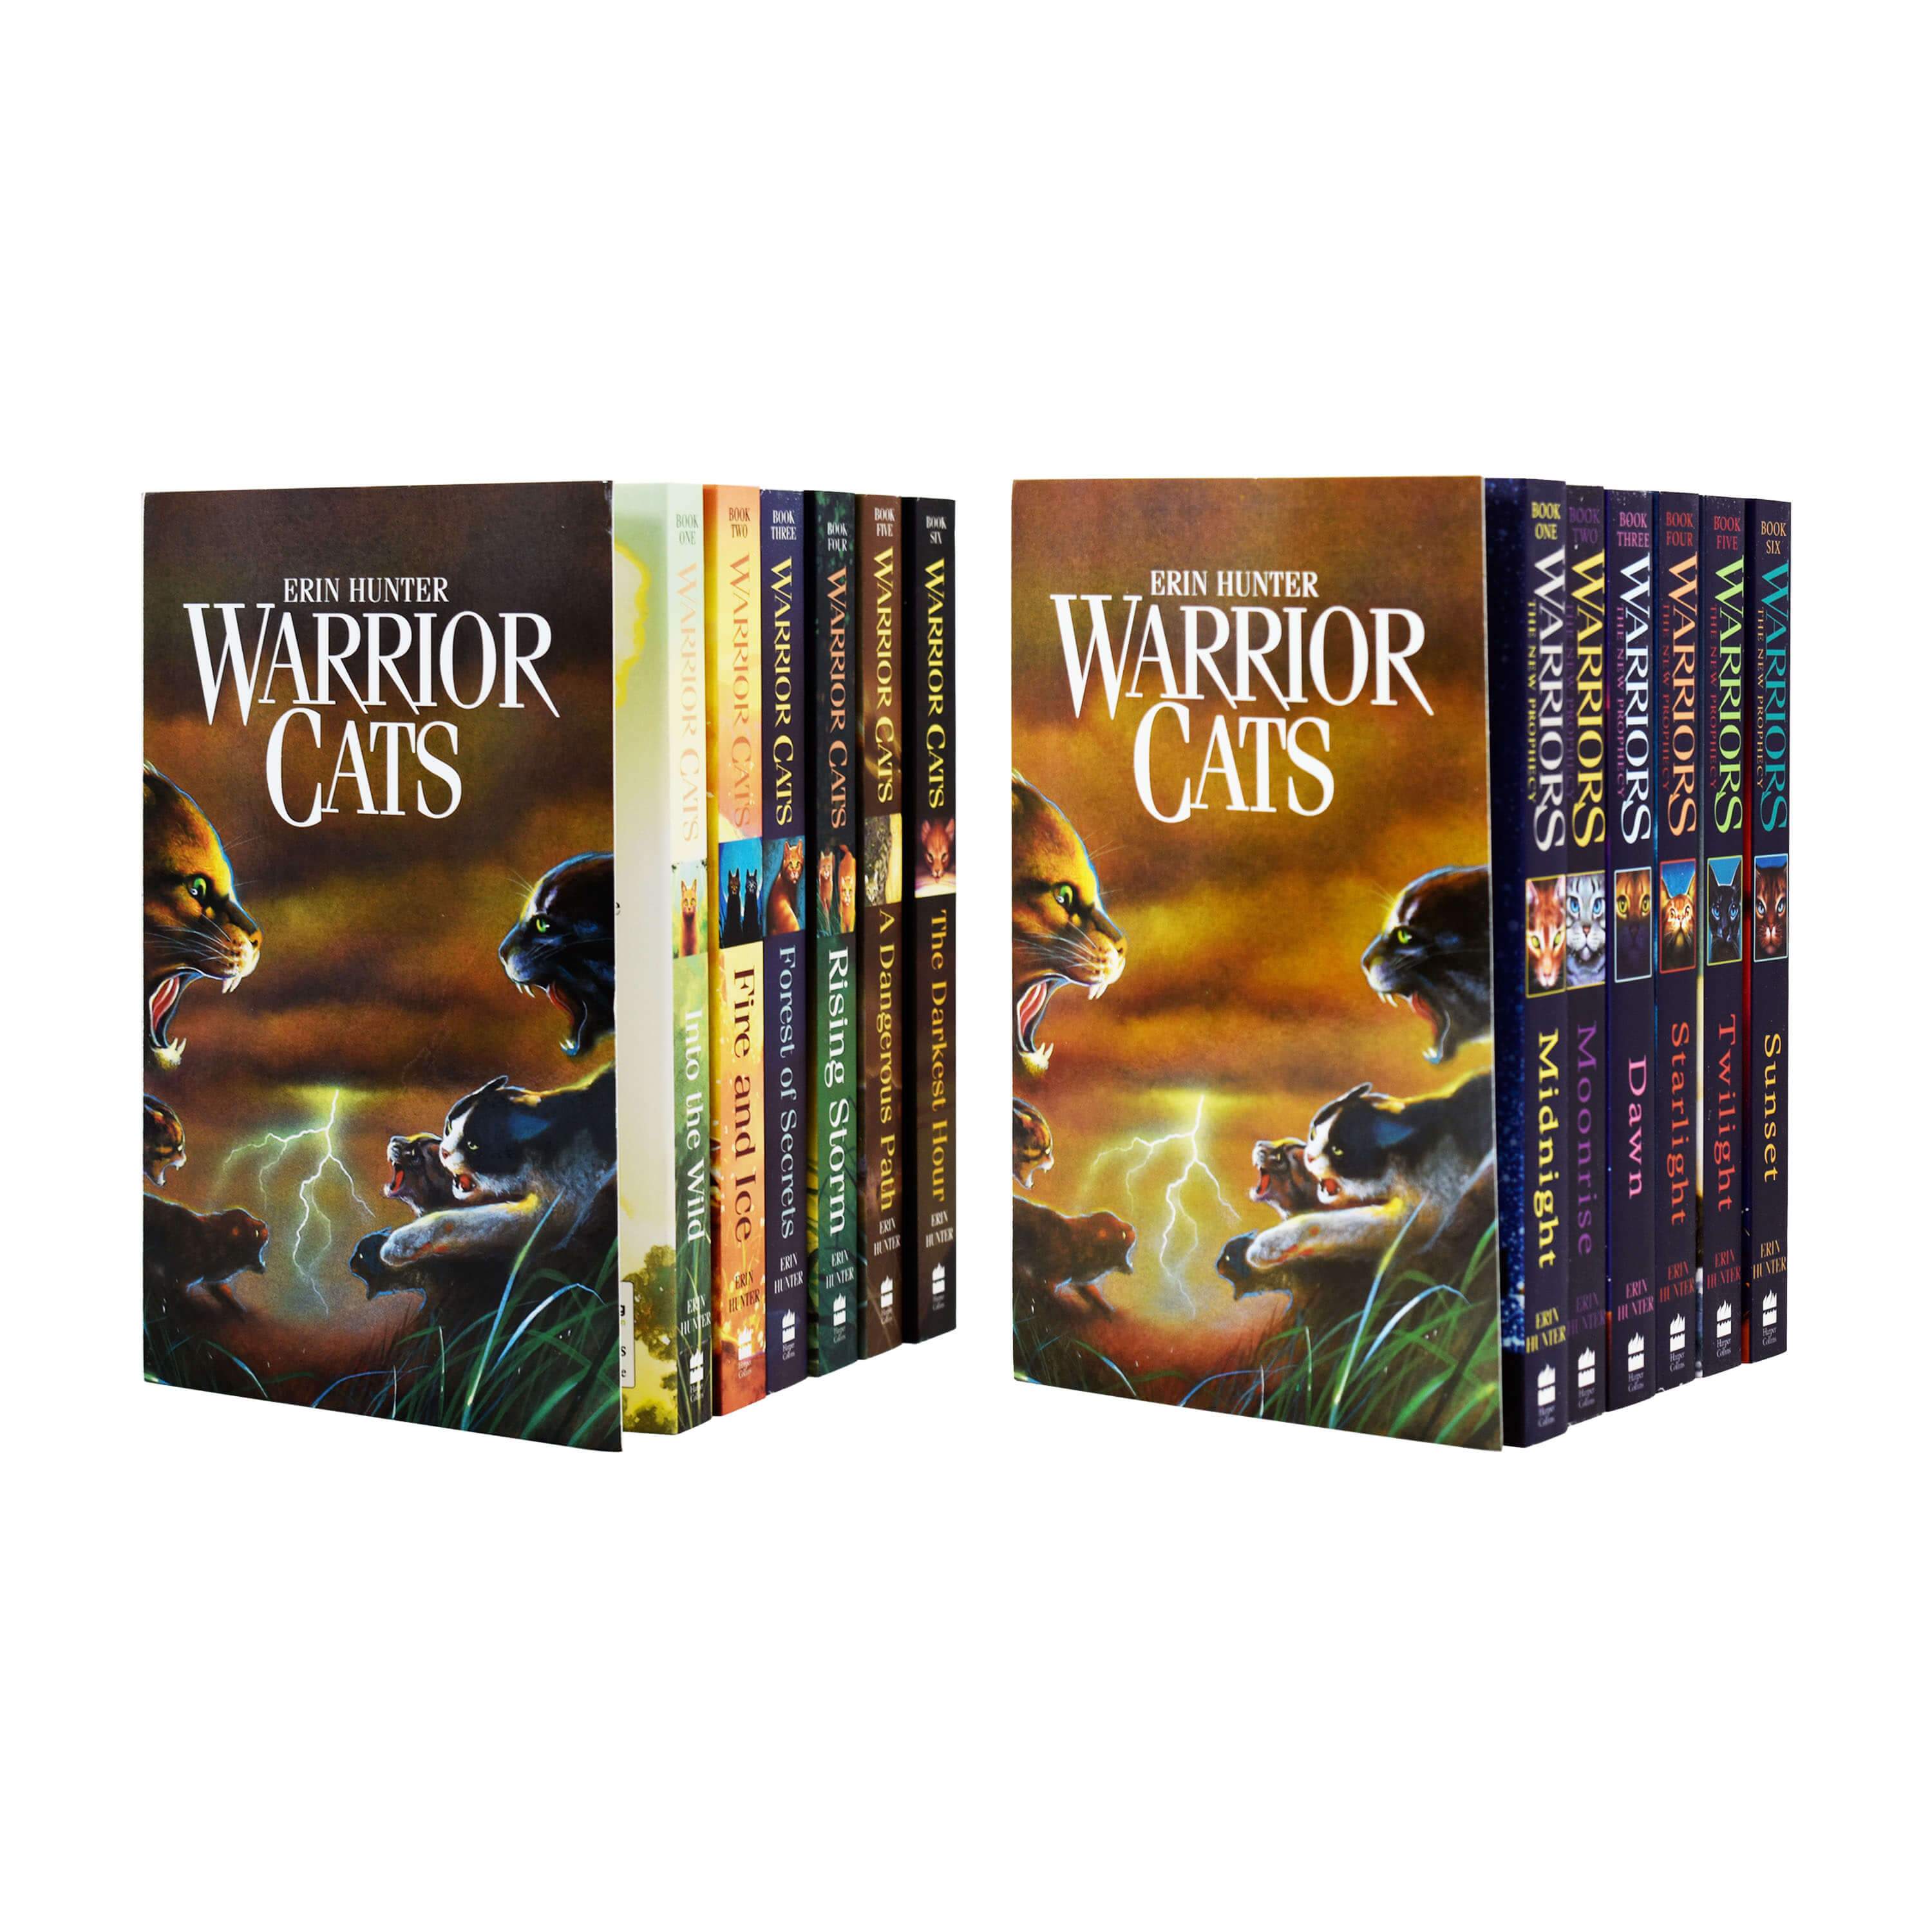 All the Warriors: The New Prophecy Books in Order